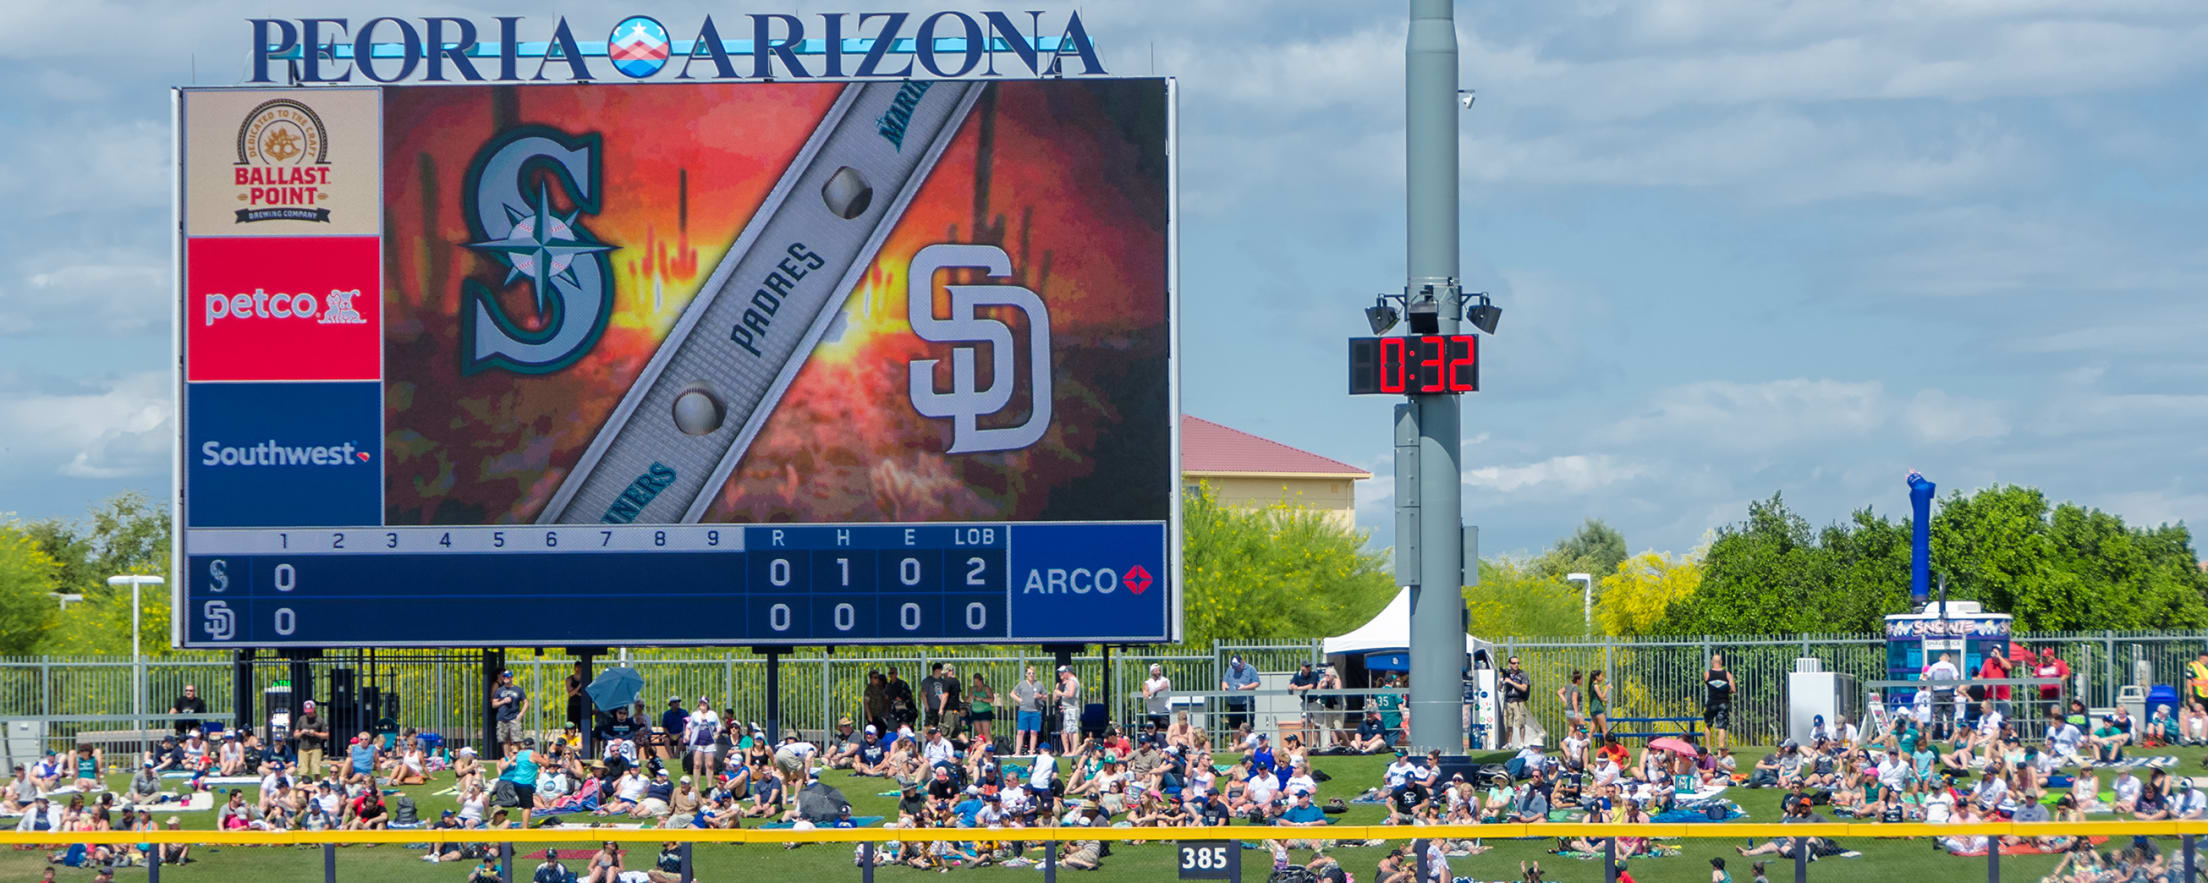 Padres announce 2019 spring training schedule - The San Diego Union-Tribune